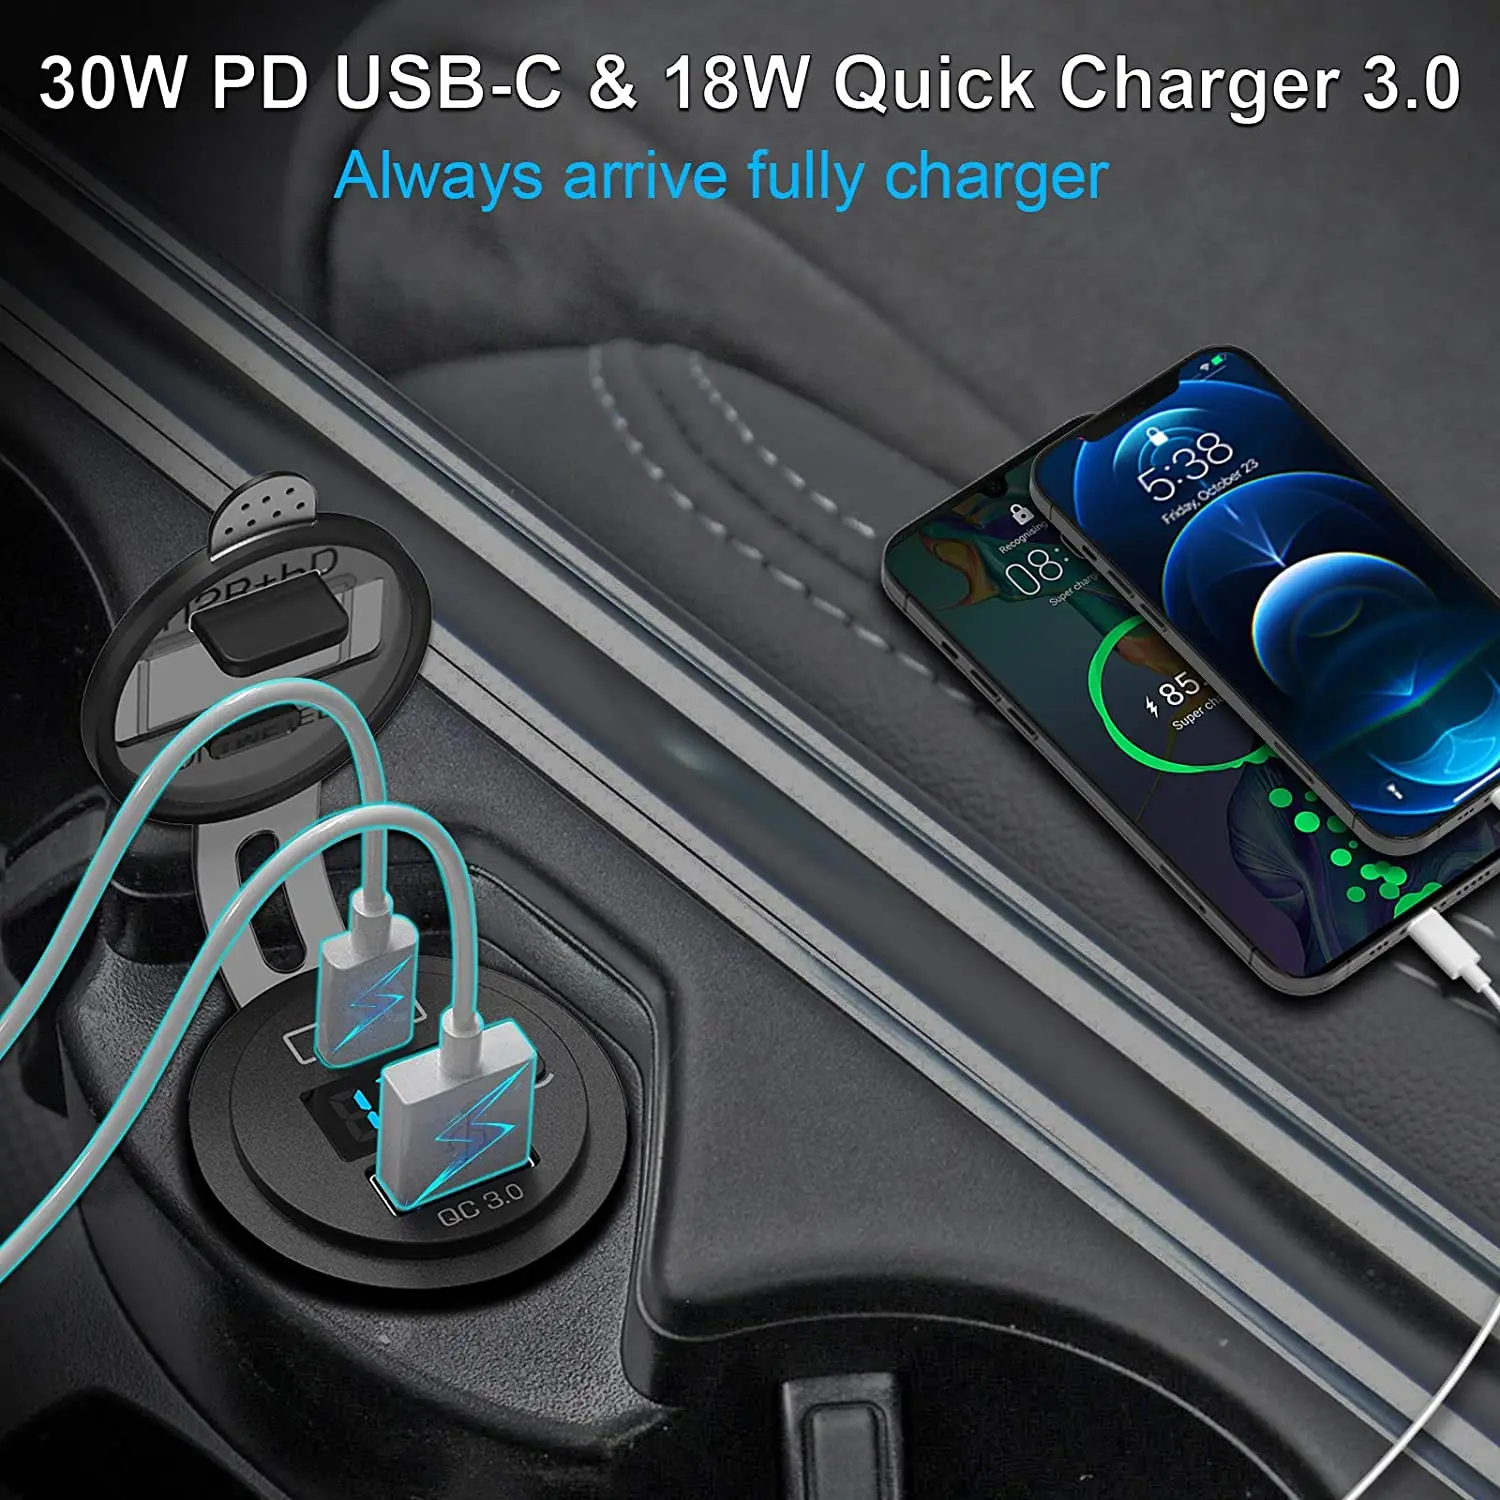 Hot Sale Marine Boat USB Charger 12V Dual USB-C PD3.0 Type C QC3.0 Car Charger Socket Power Outlet With LED Voltmeter Switch